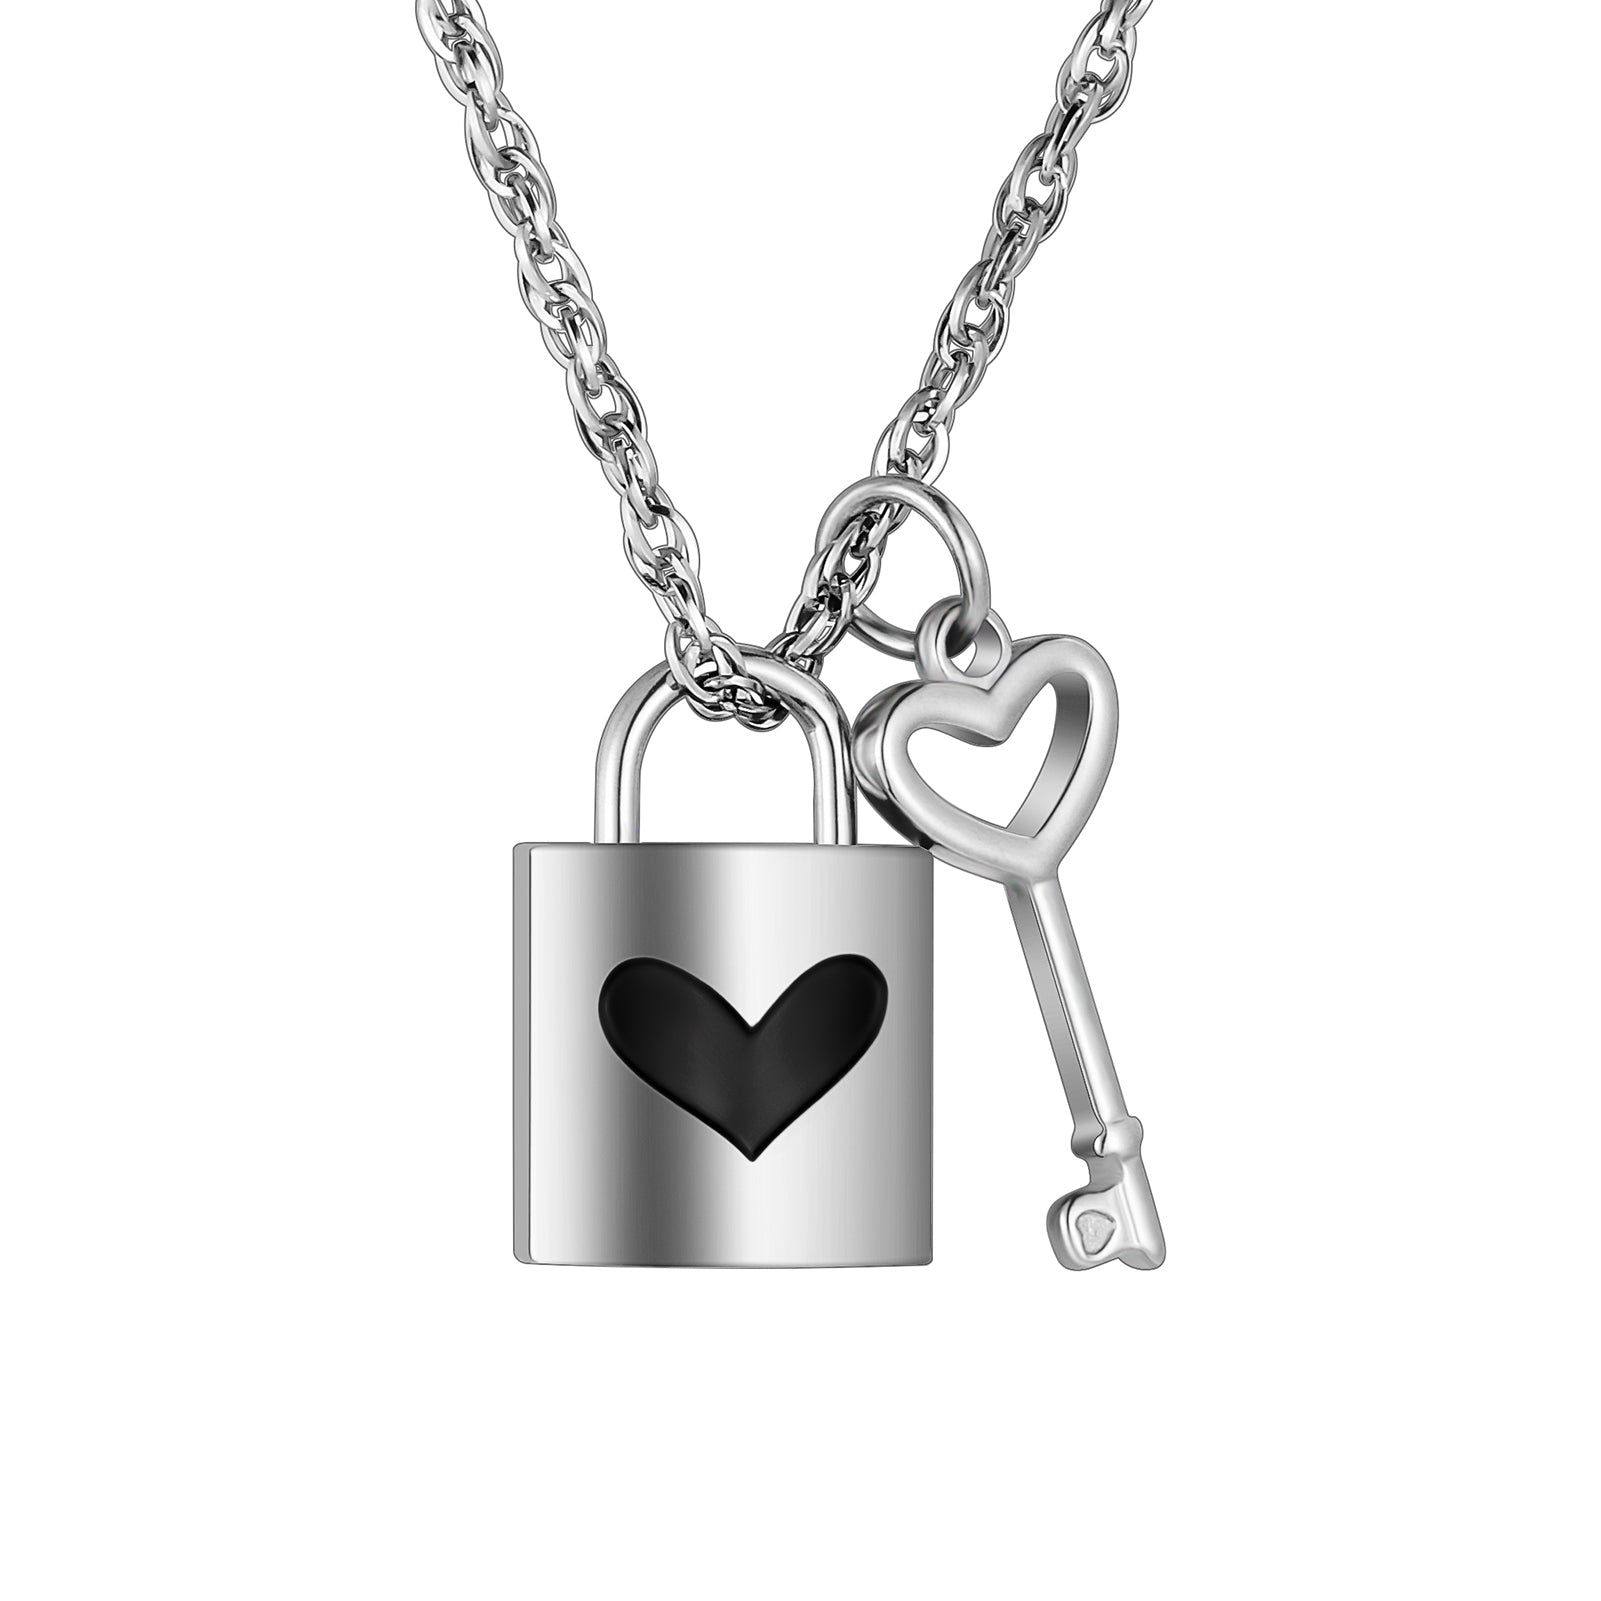 The Heart Series Silver Heart Lock & Key Necklace